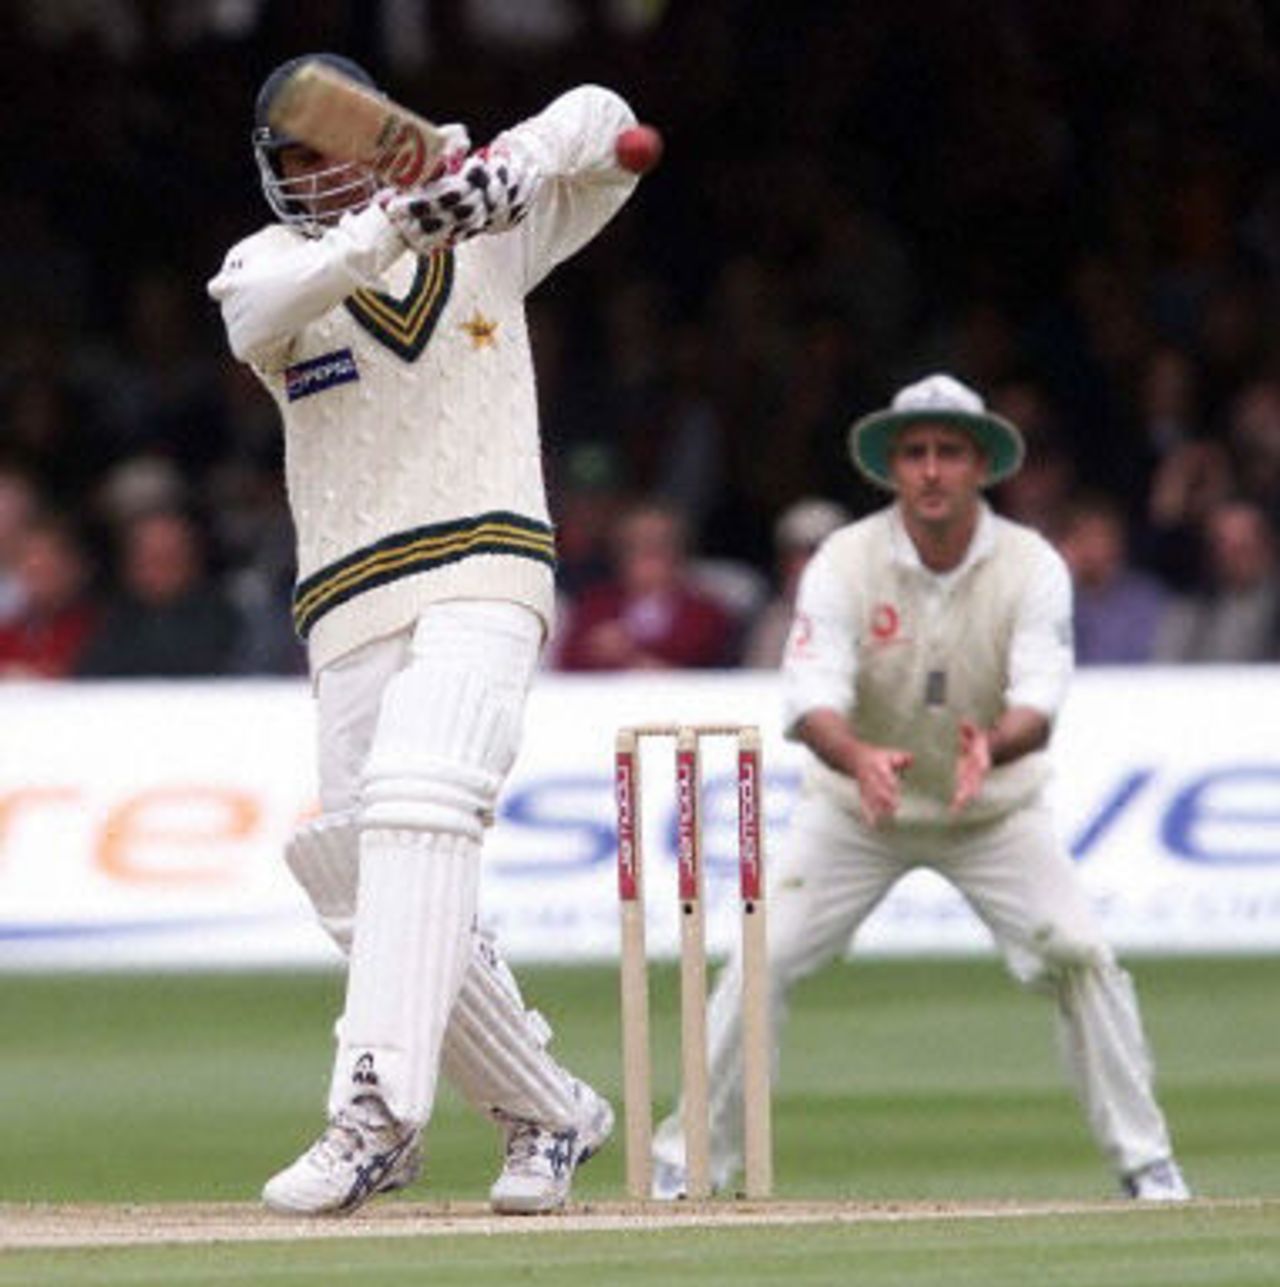 Inzamam-ul-Haq hooks a four, day 4, 1st Test at Lord's, 17-21 May 2001.